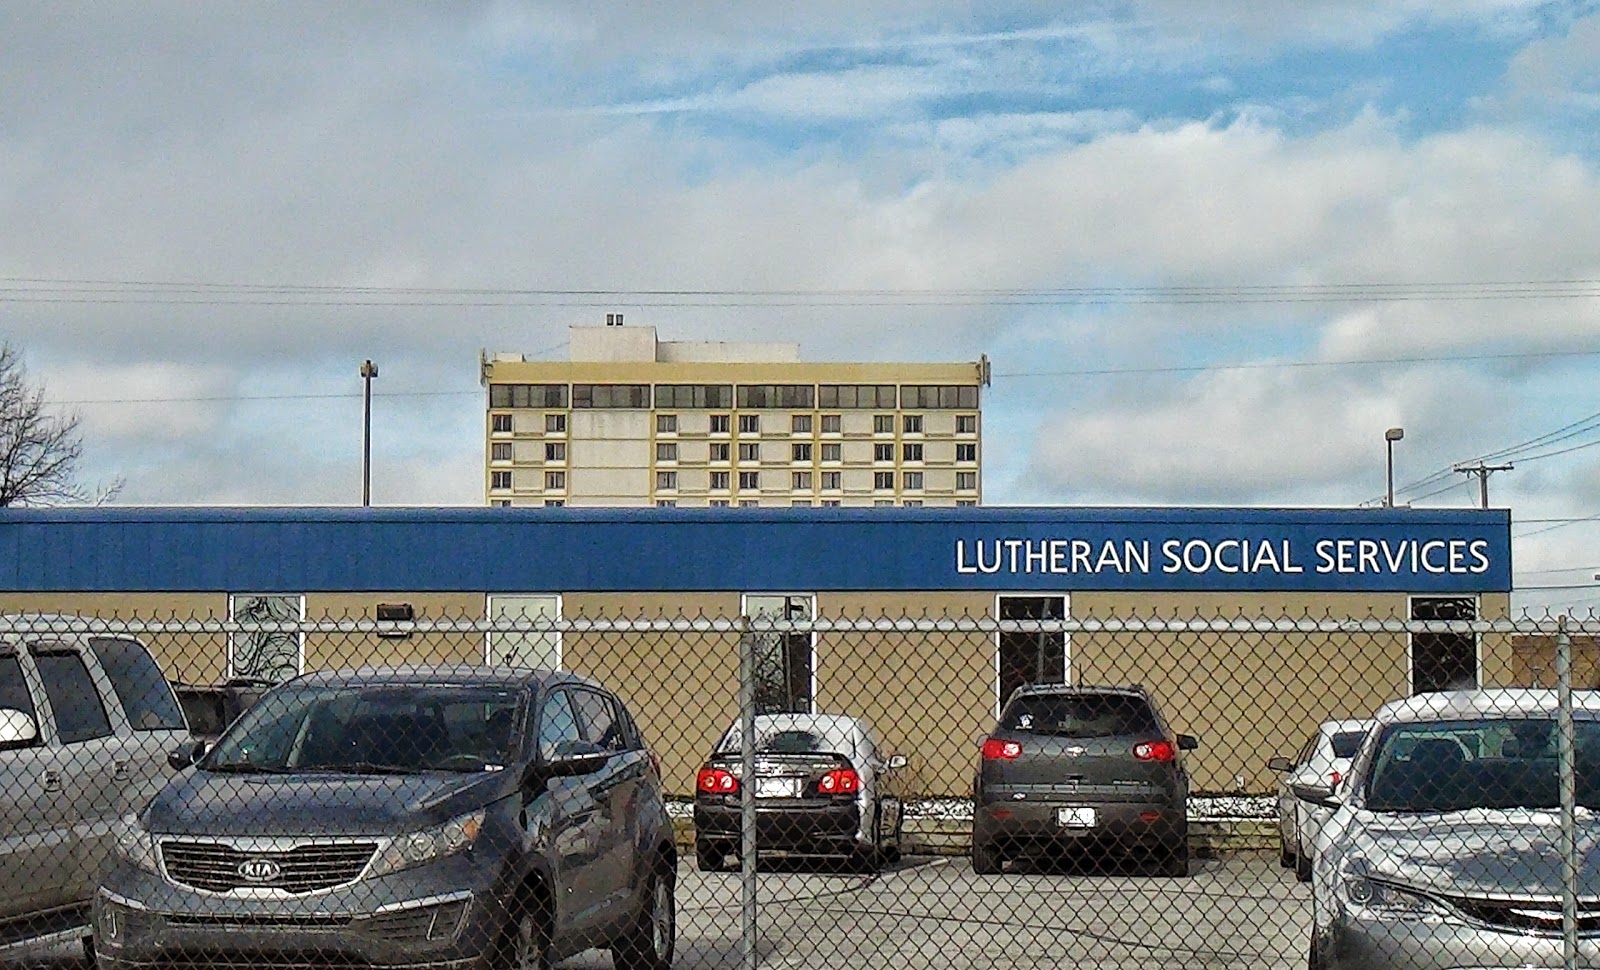 Lutheran Social Services of Indiana